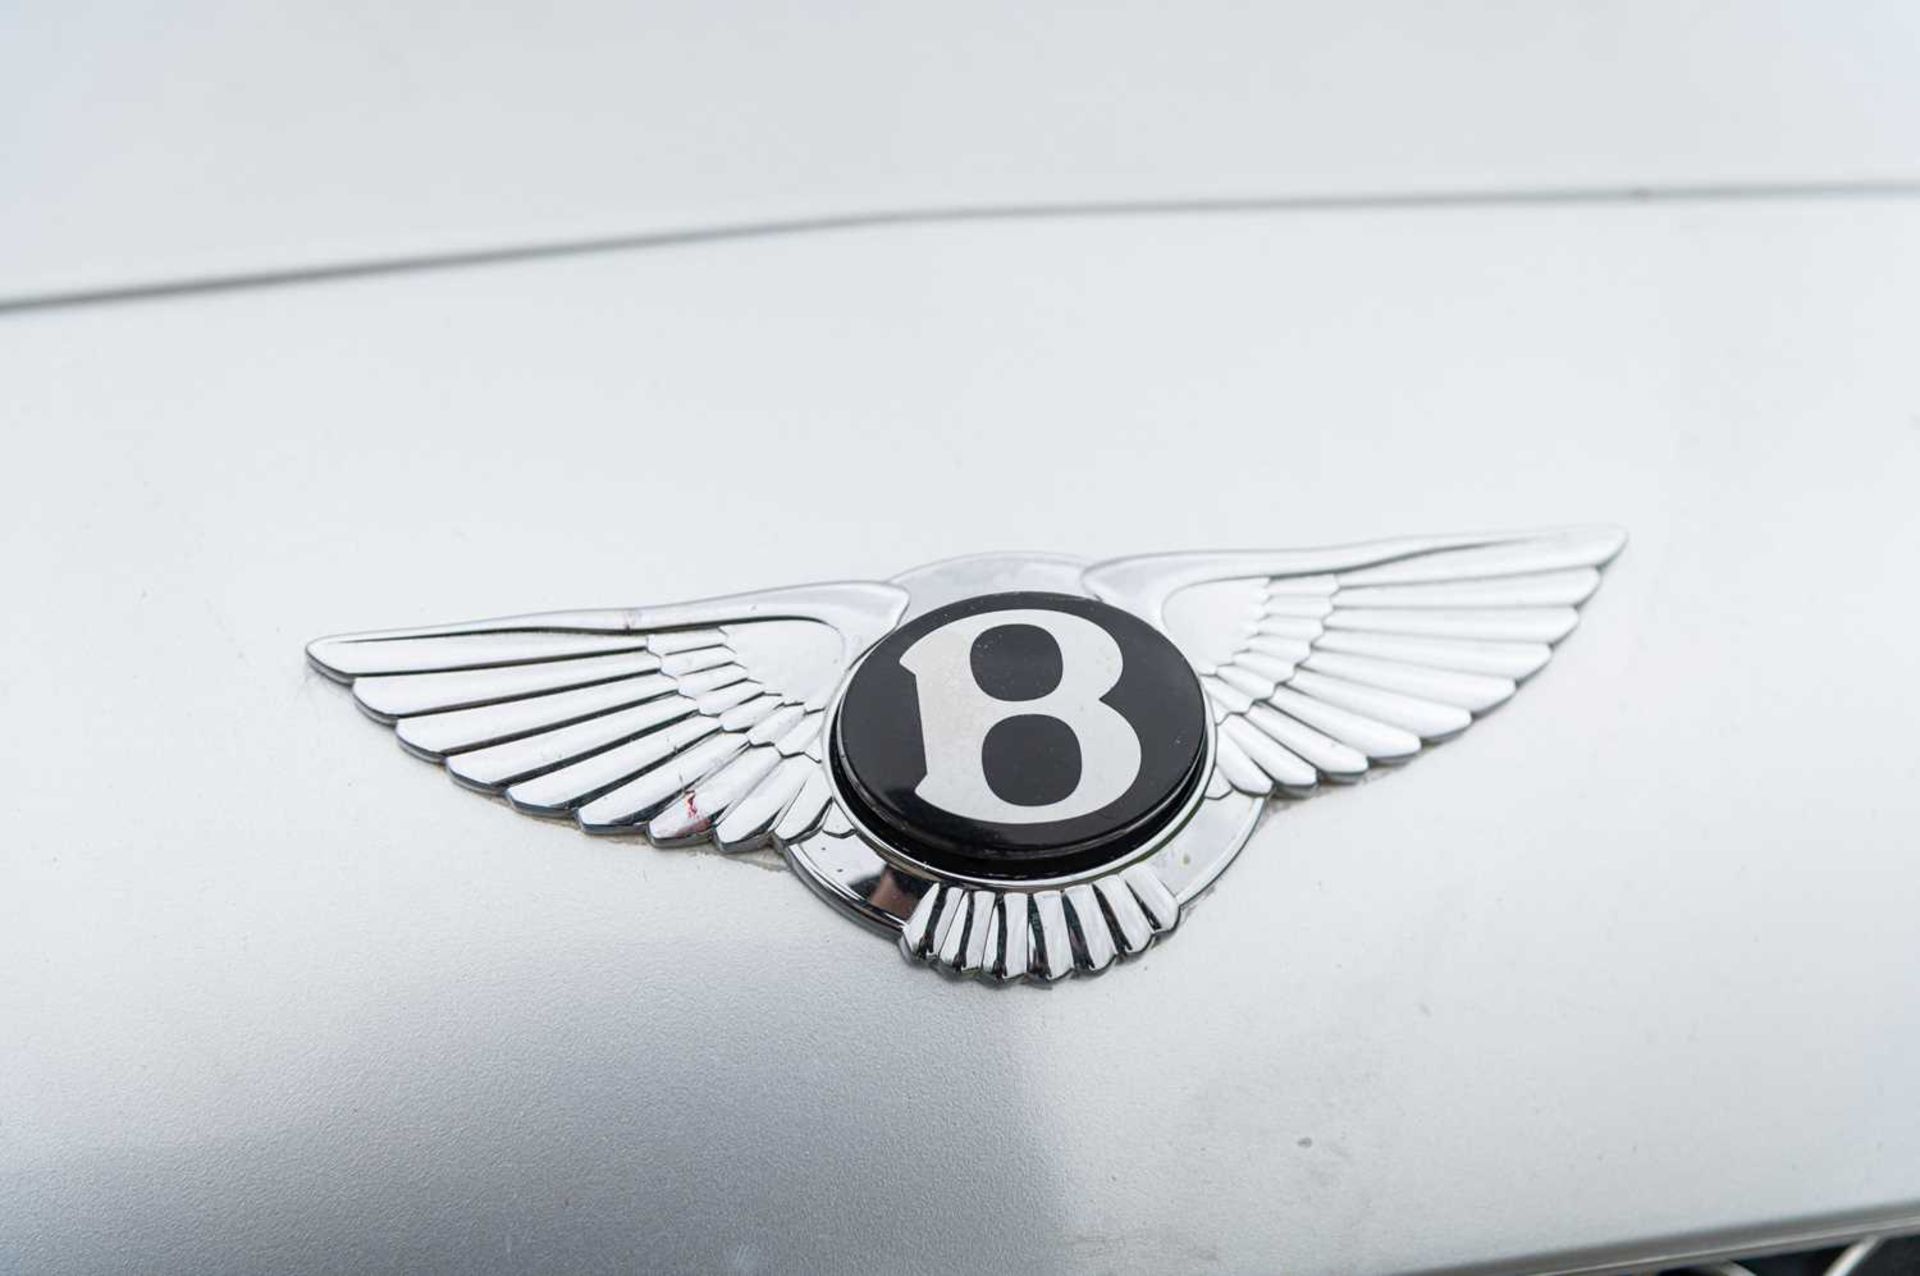 2005 Bentley Continental Flying Spur - Image 36 of 81